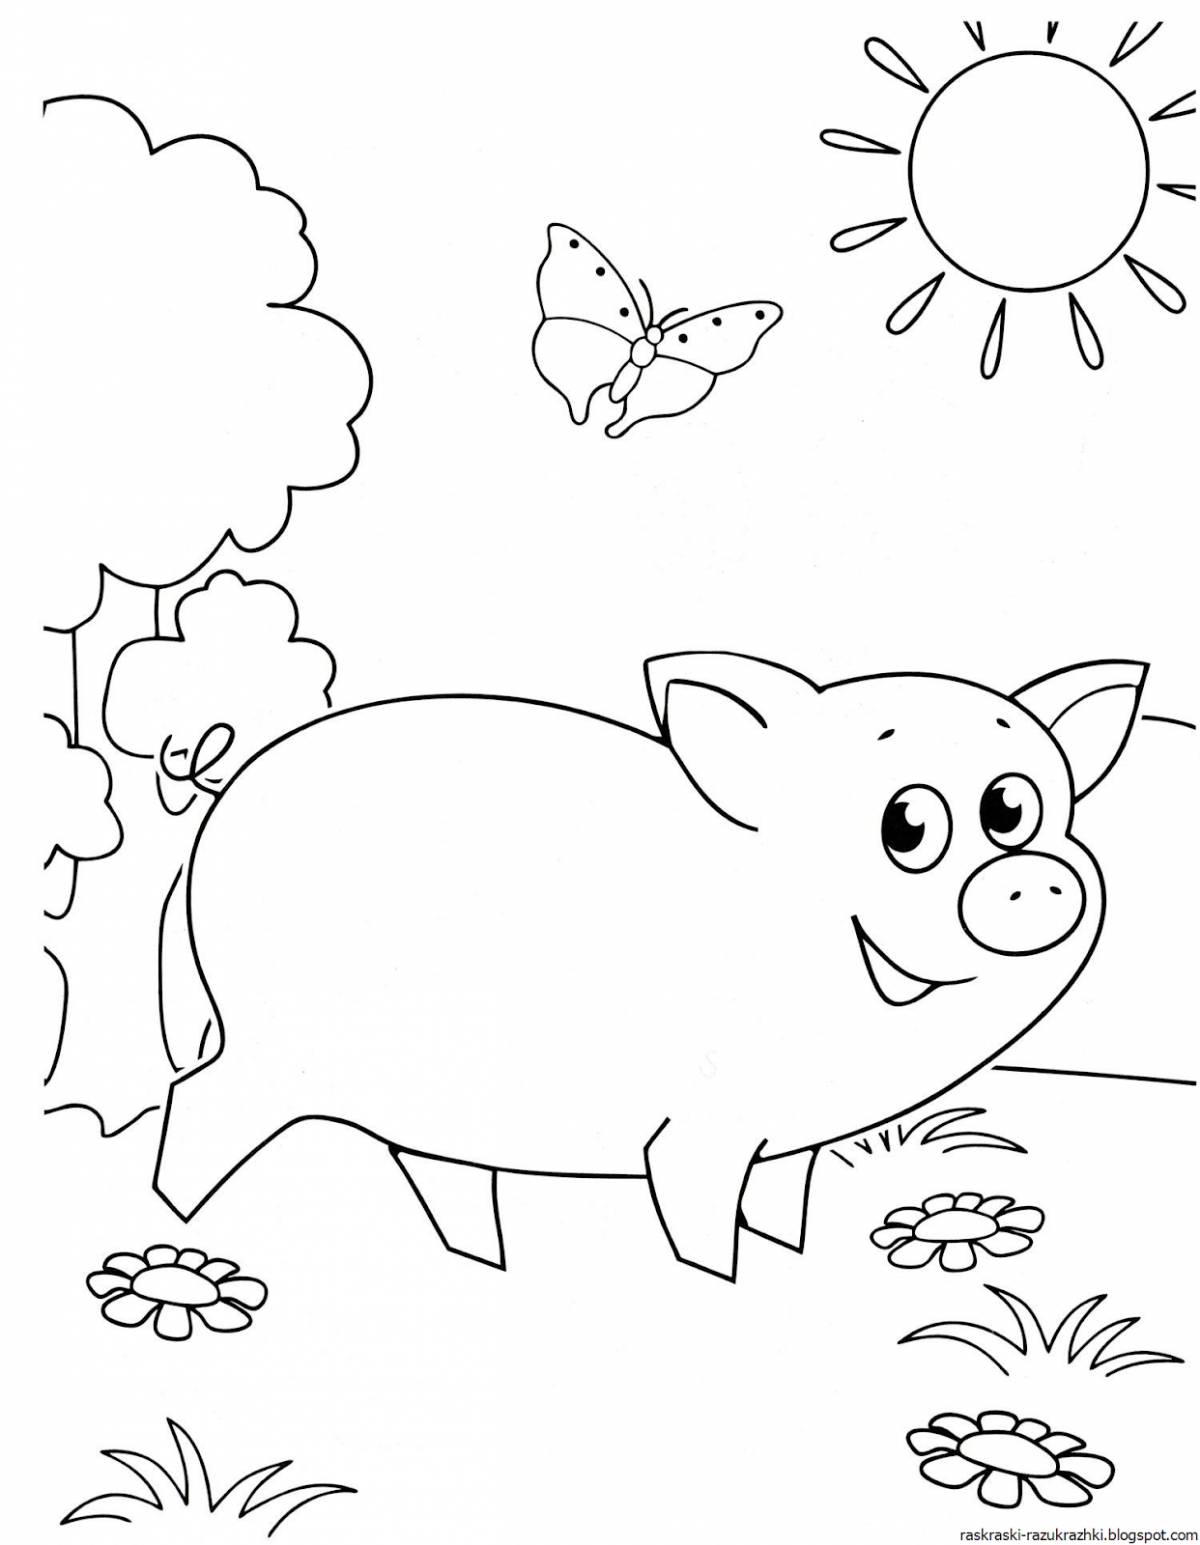 Animated piglet coloring page